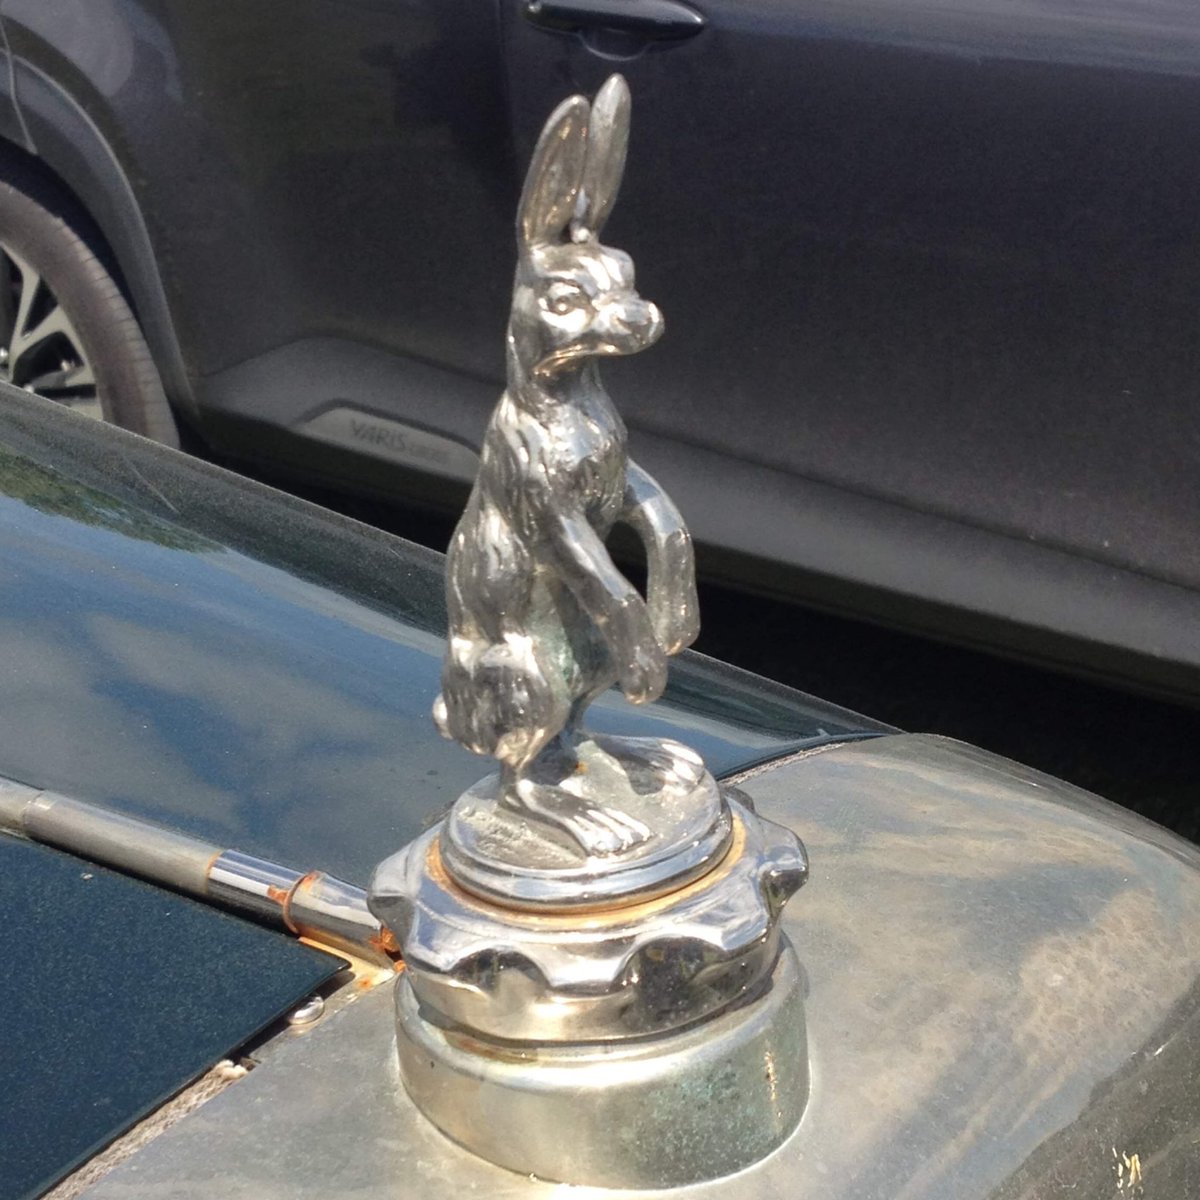 My’s hoomans spotted a bunnie on the bonnet of a Alviss cars.  He gets to do real zooomies #rabbits #rabbitsoftwitter #bunnies #classiccars #alvis